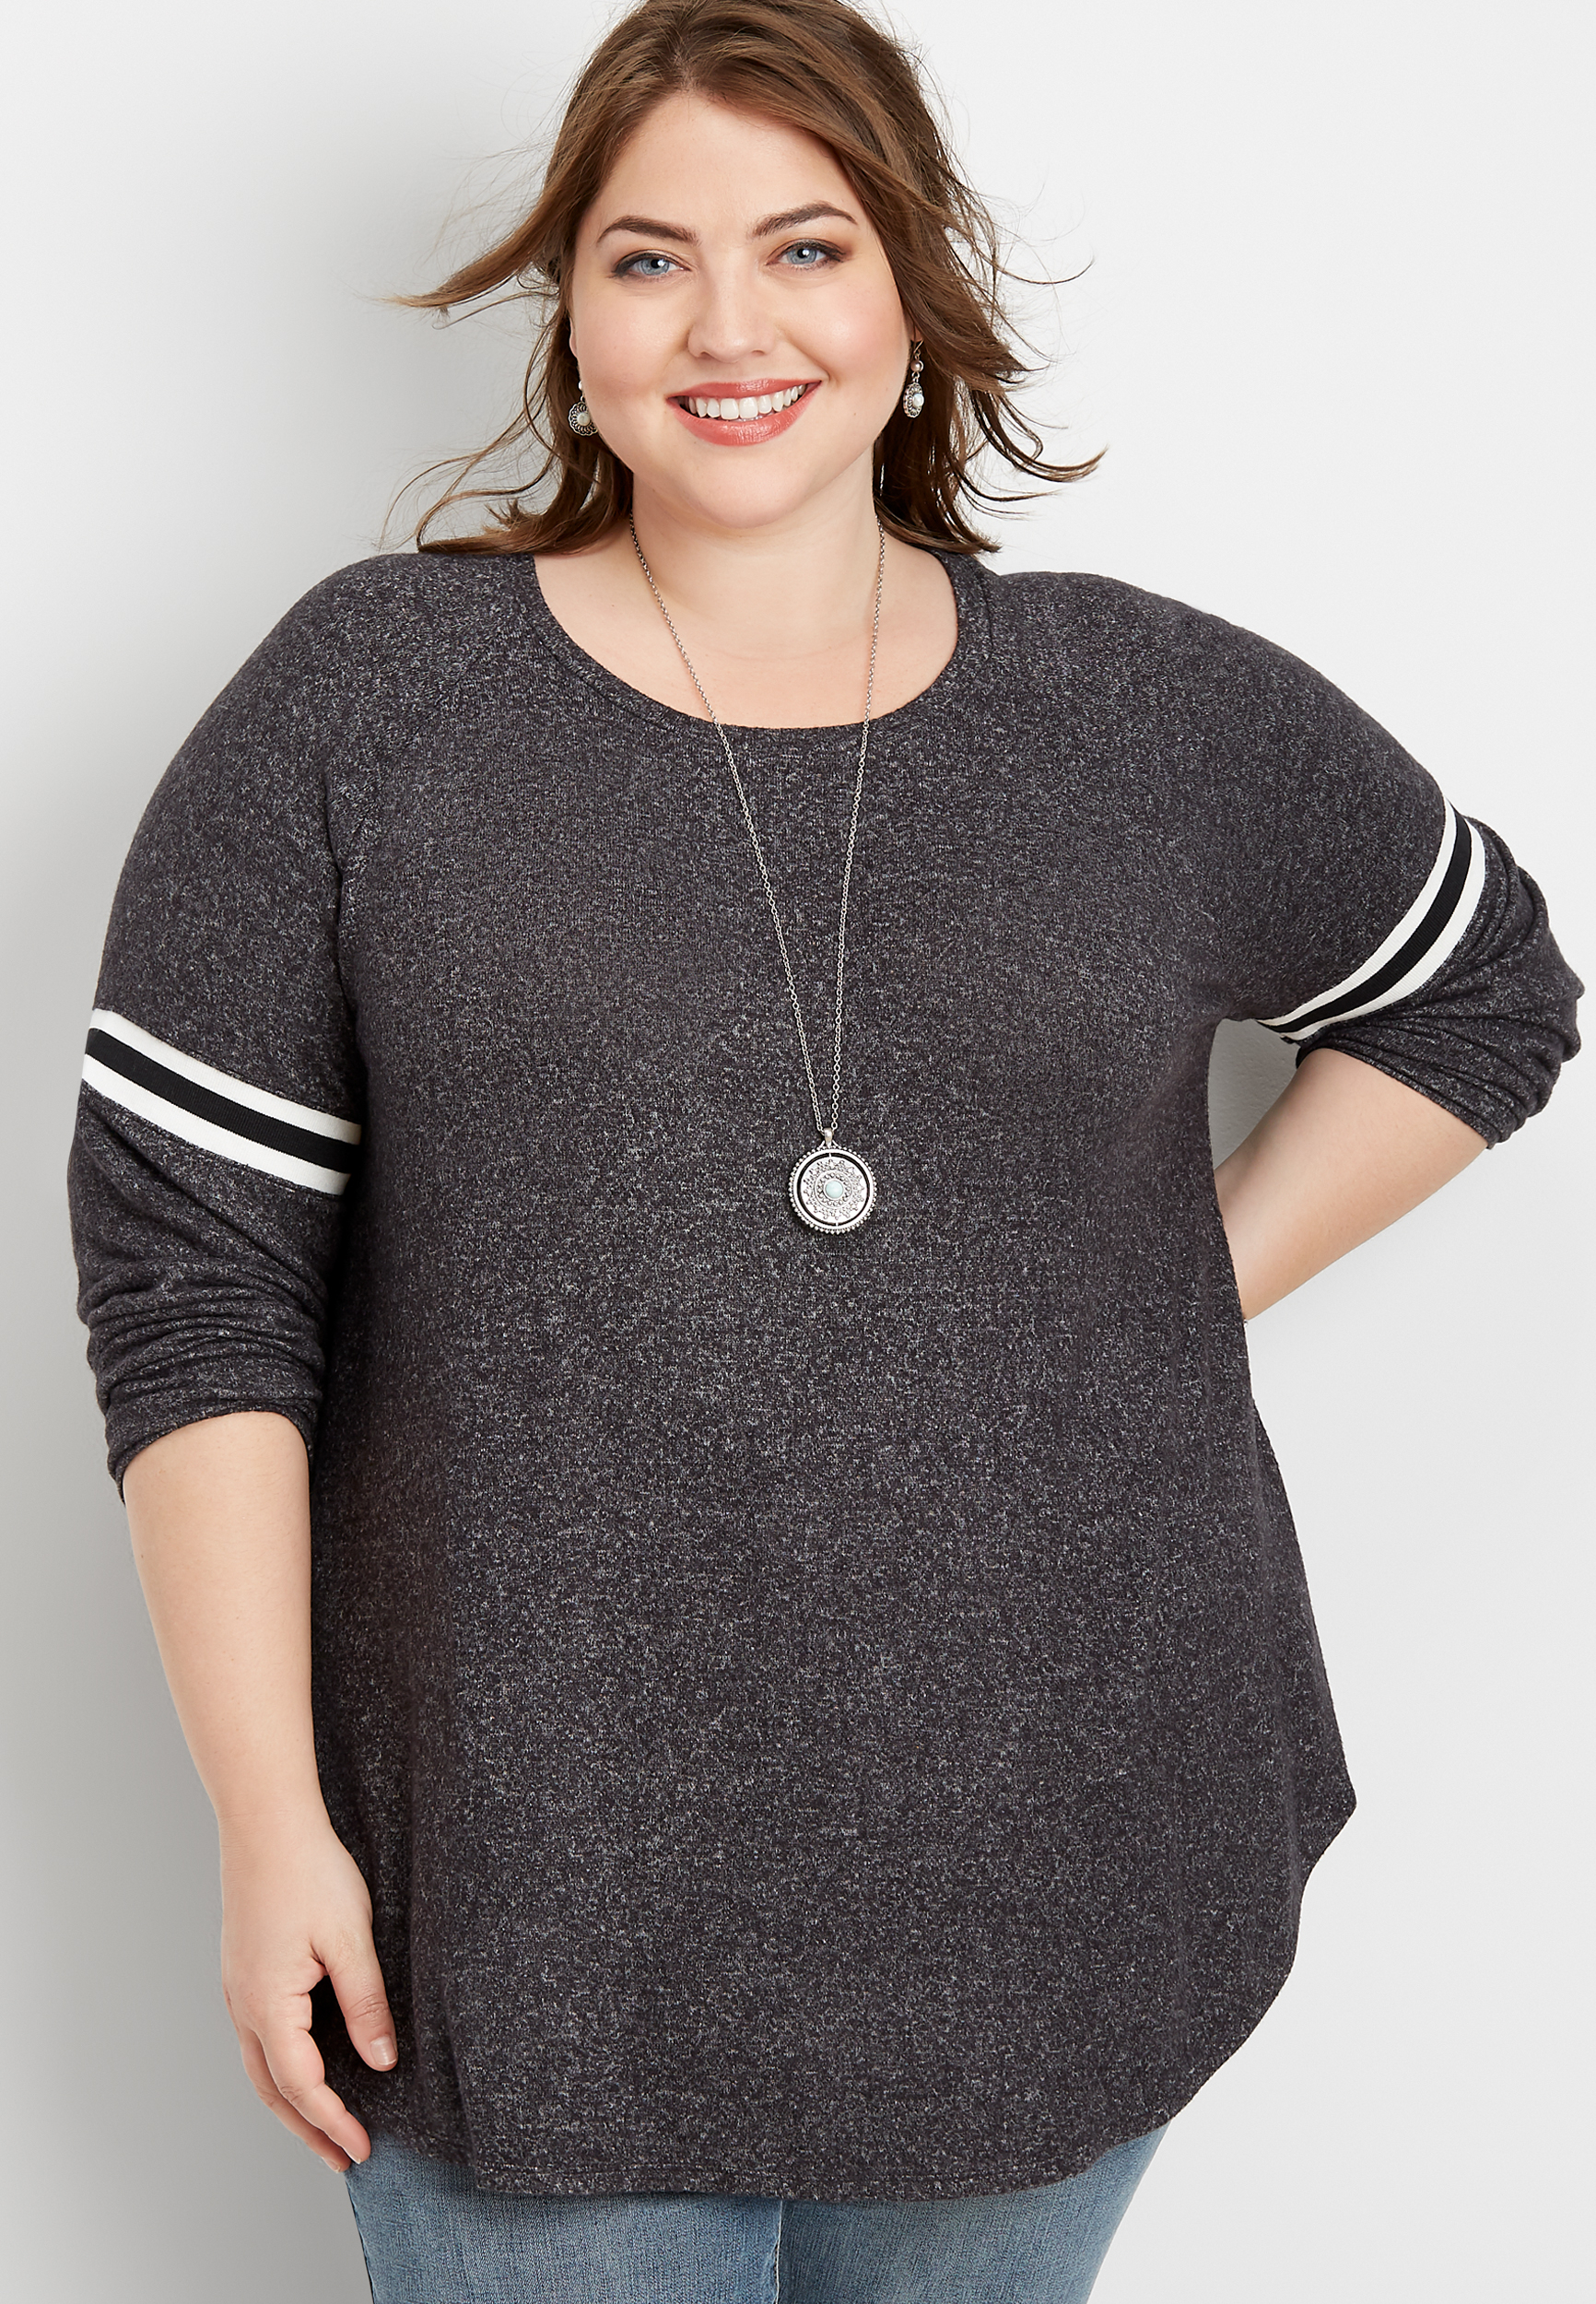 Plus Size Fashion Tops | maurices